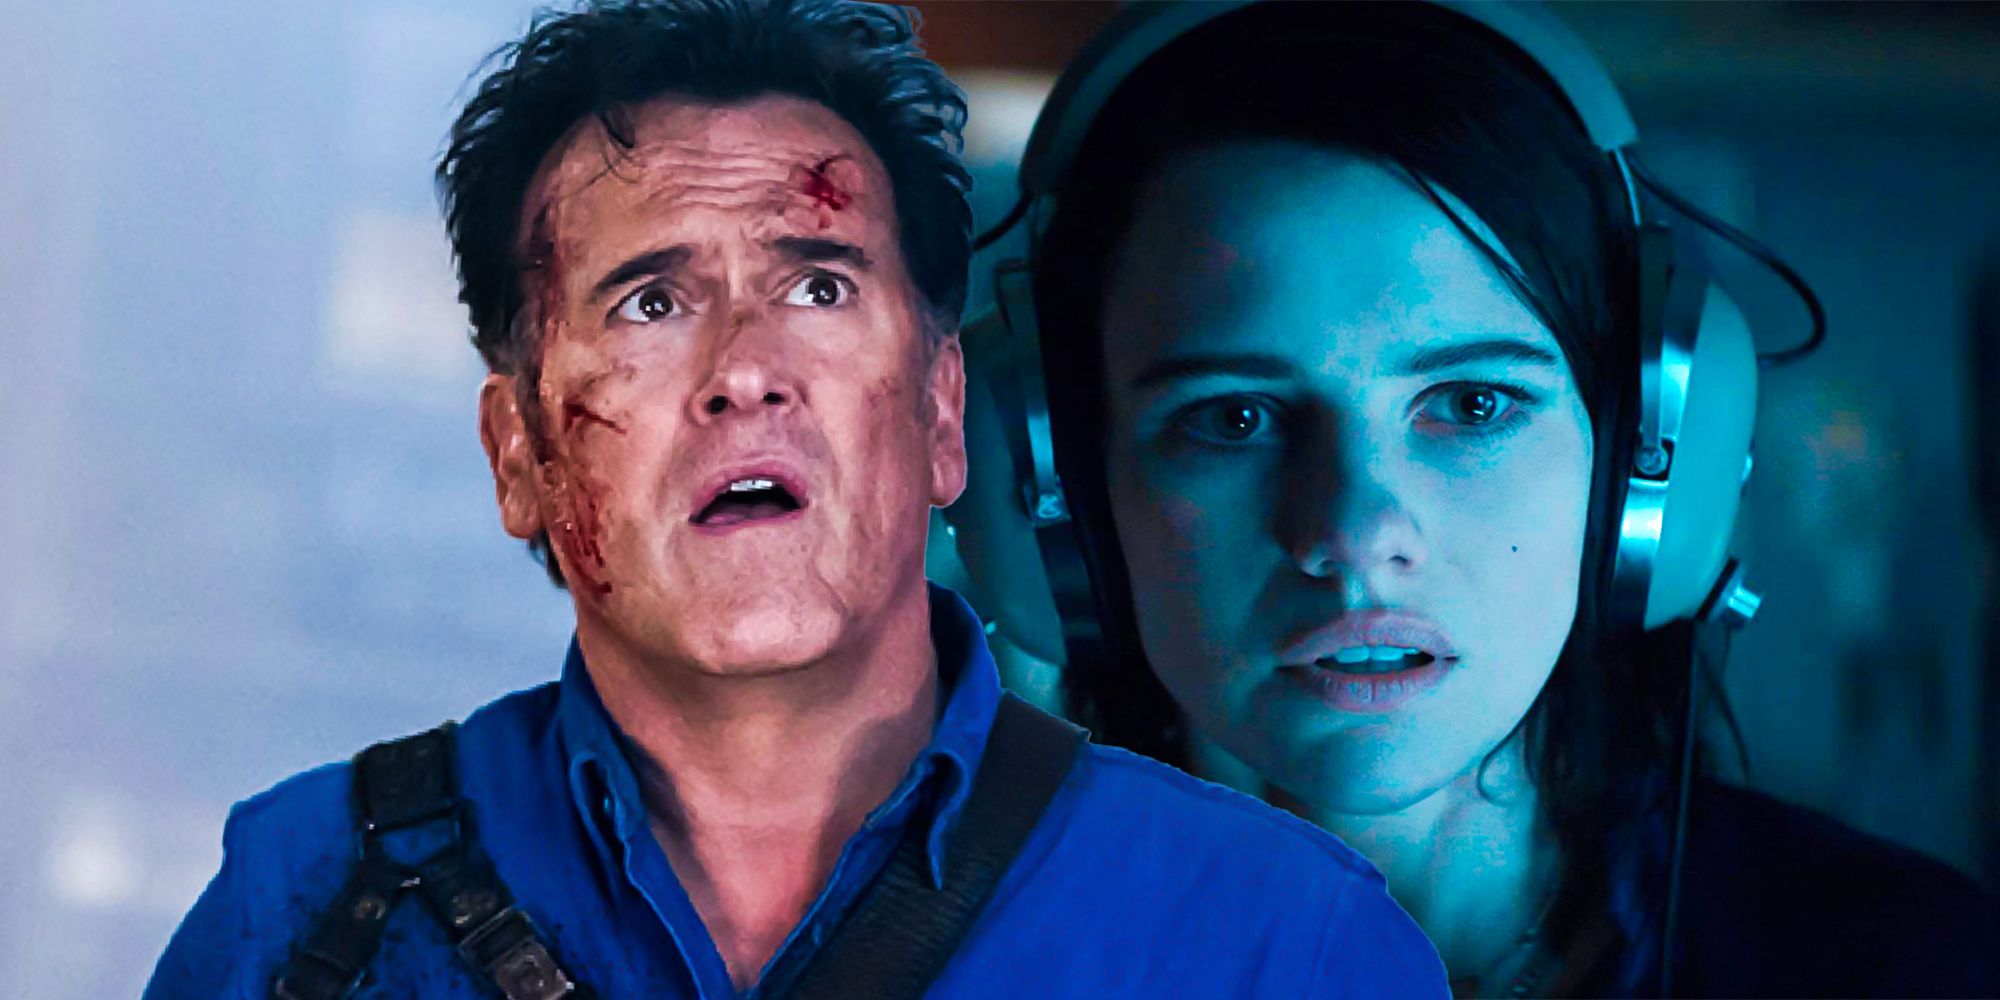 Bruce Campbell as Ash in Ash vs. Evil Dead and Lily Sullivan as Beth in Evil Dead Rise